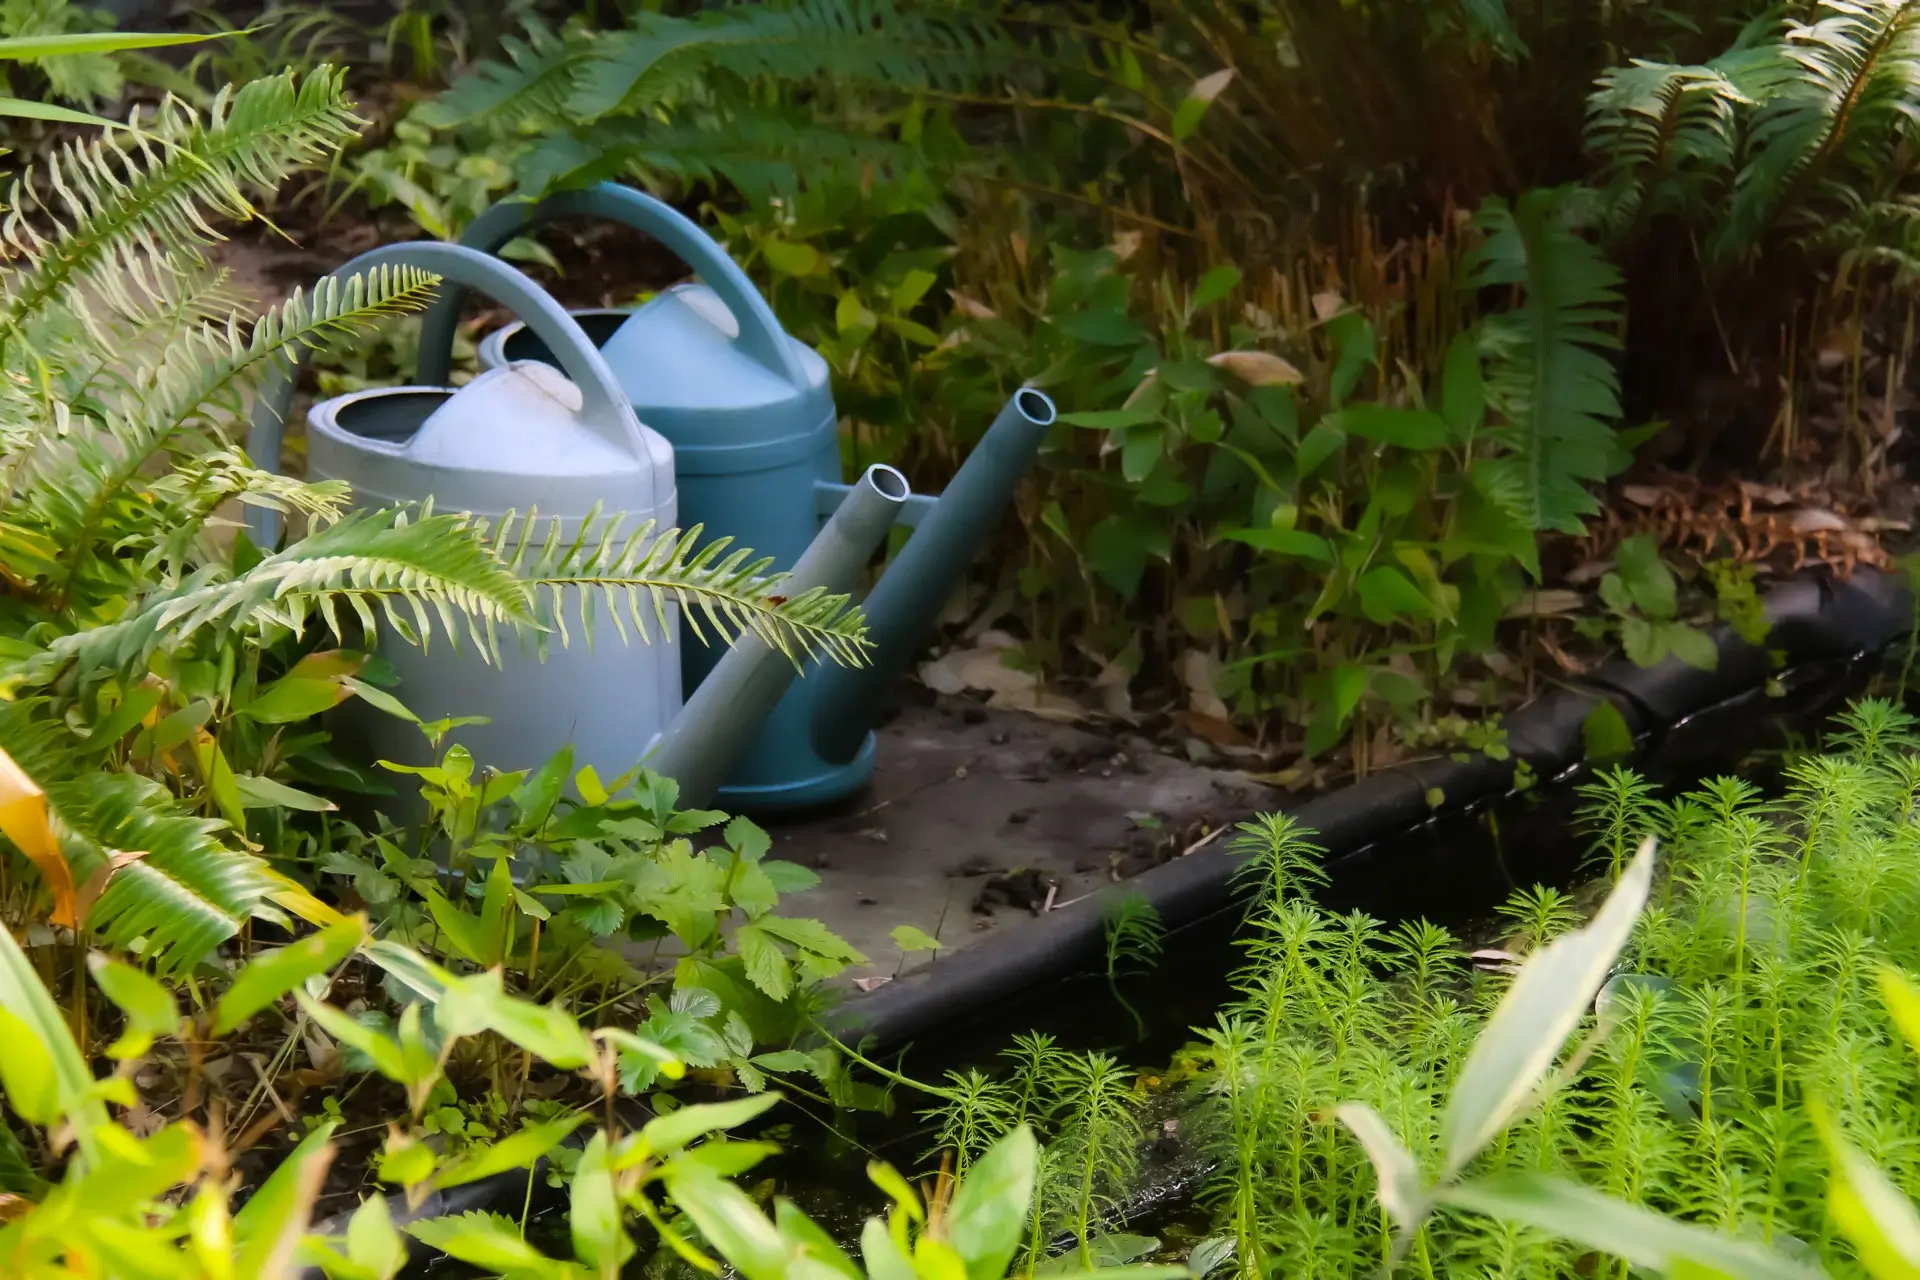 photo of two watering cans on the ground in the middle of plants